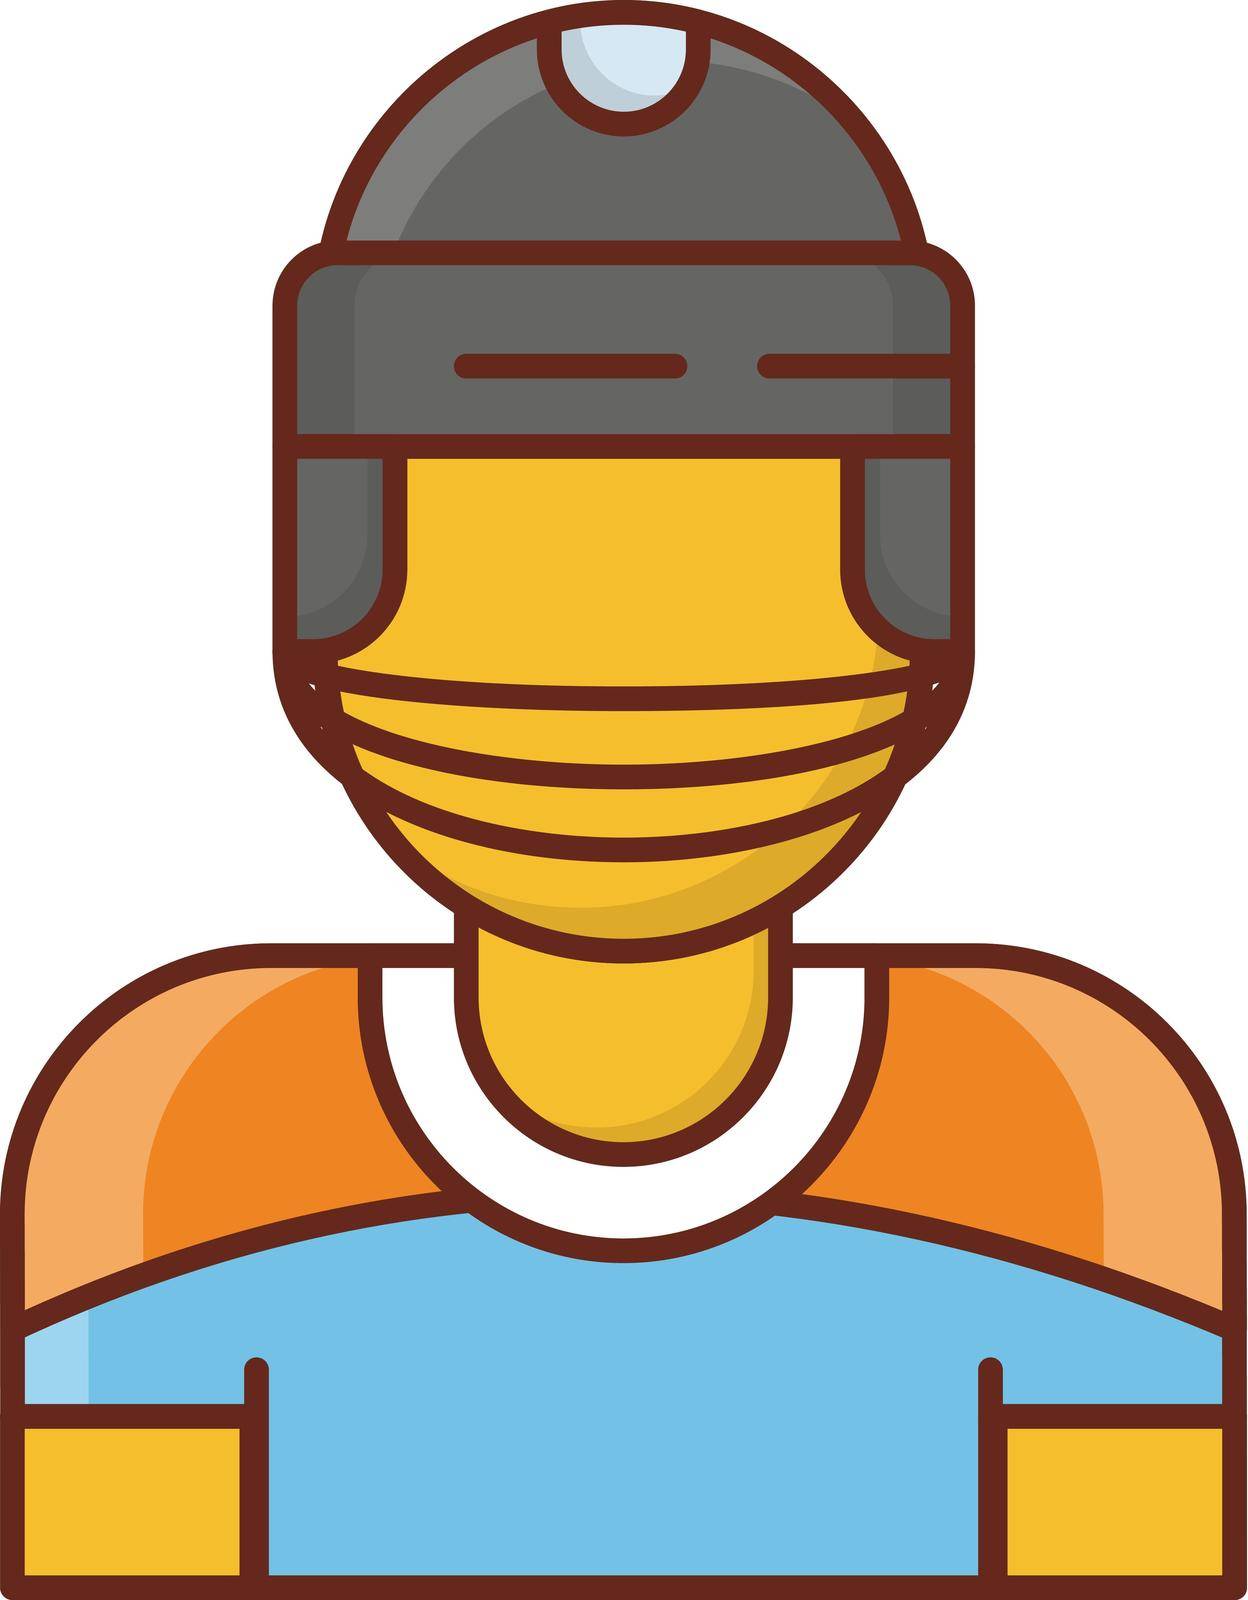 player by FlaticonsDesign